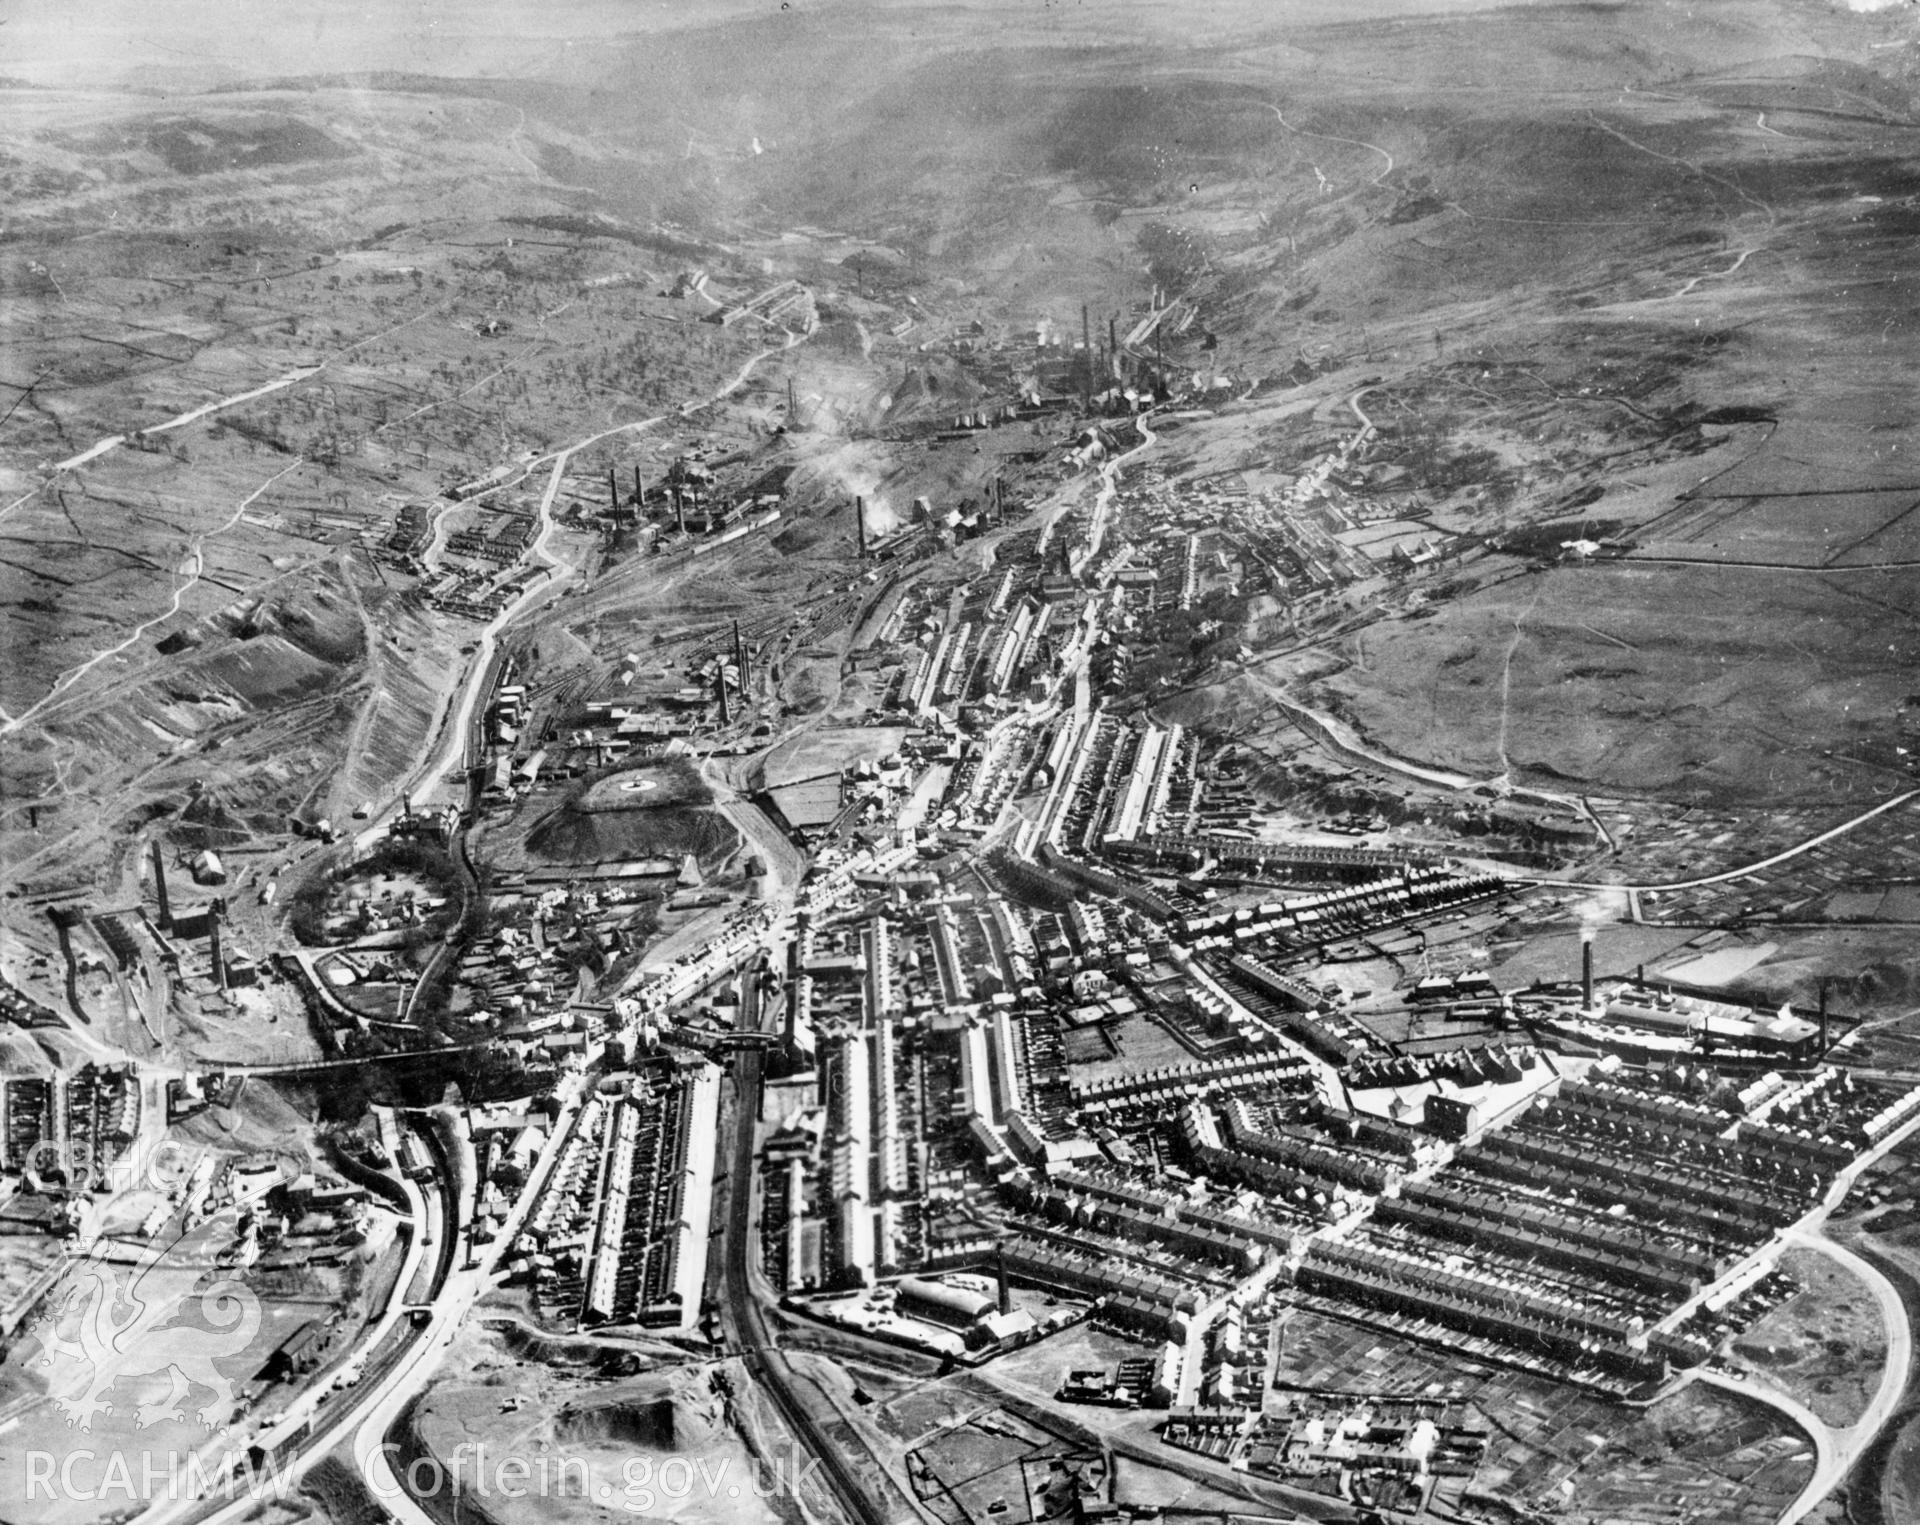 General view of Ebbw Vale showing steelworks, commissioned by R. Thomas & Co.. Oblique aerial photograph, 5?x4? BW glass plate.